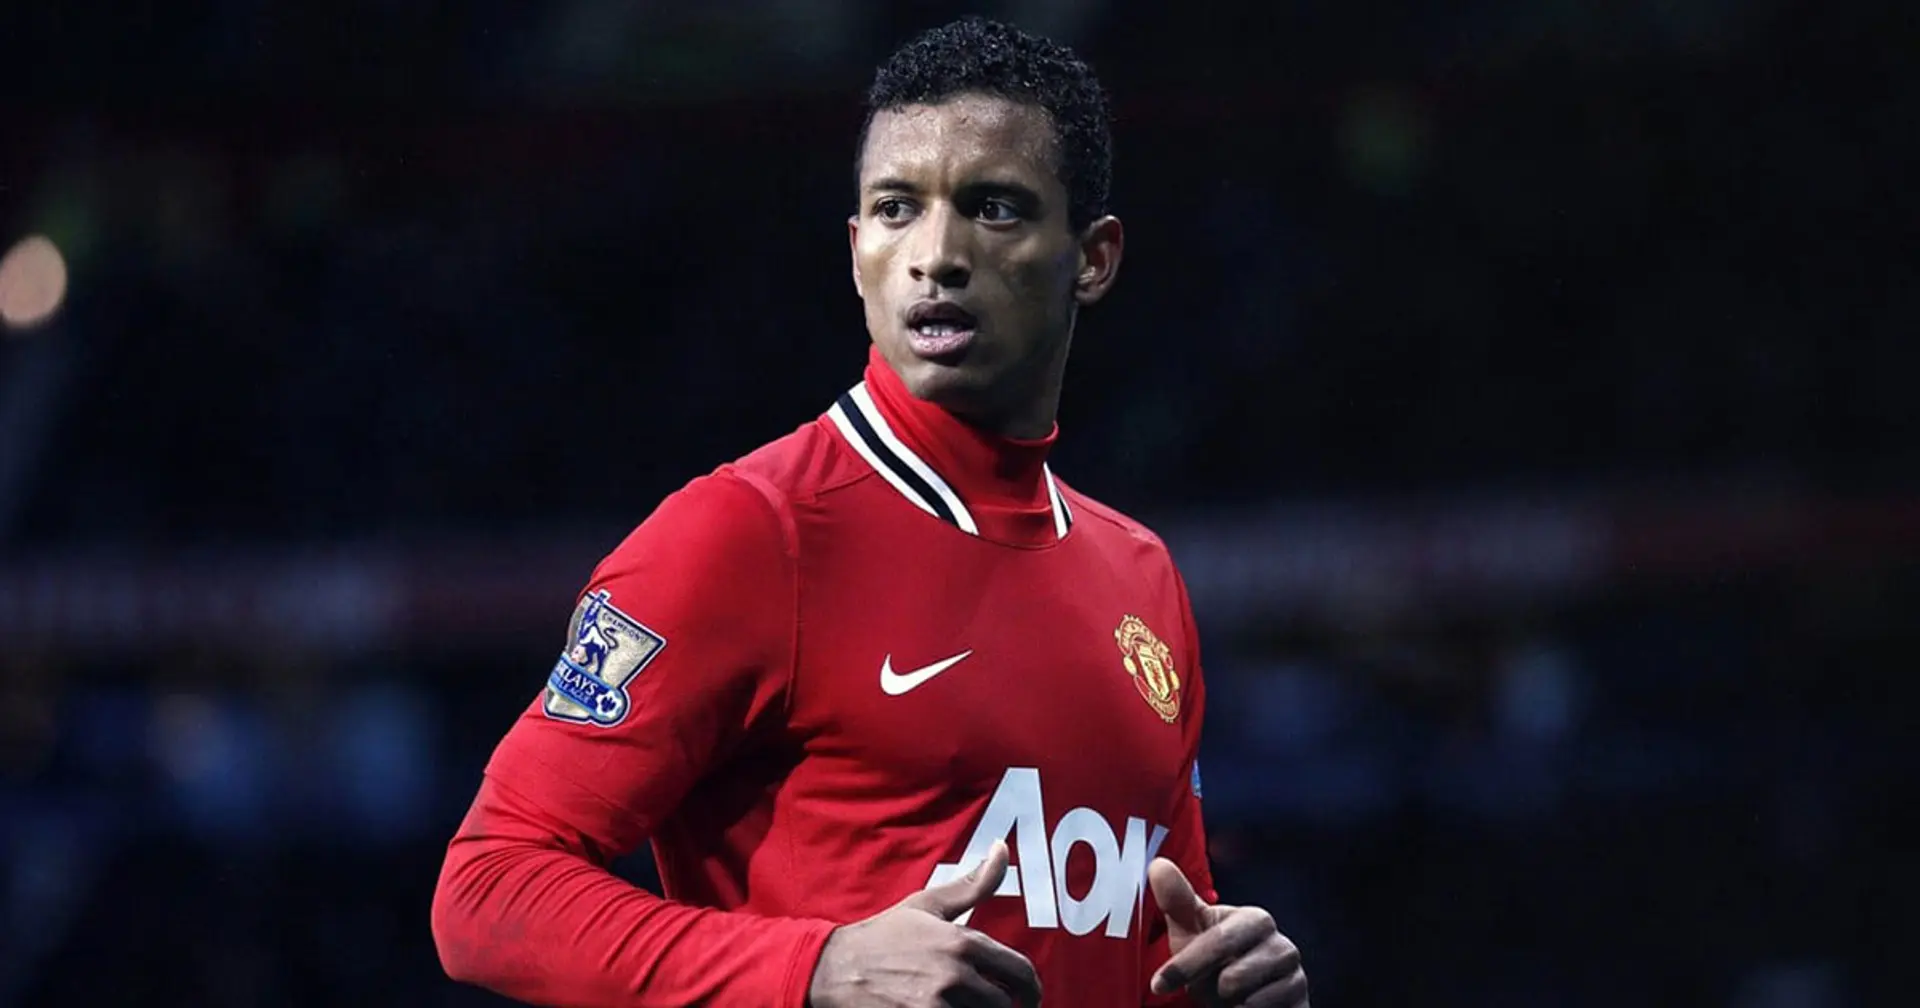 Nani opens up on living with Cristiano in first days at United: 'By the time I left that house, I had become allergic to defeat!'